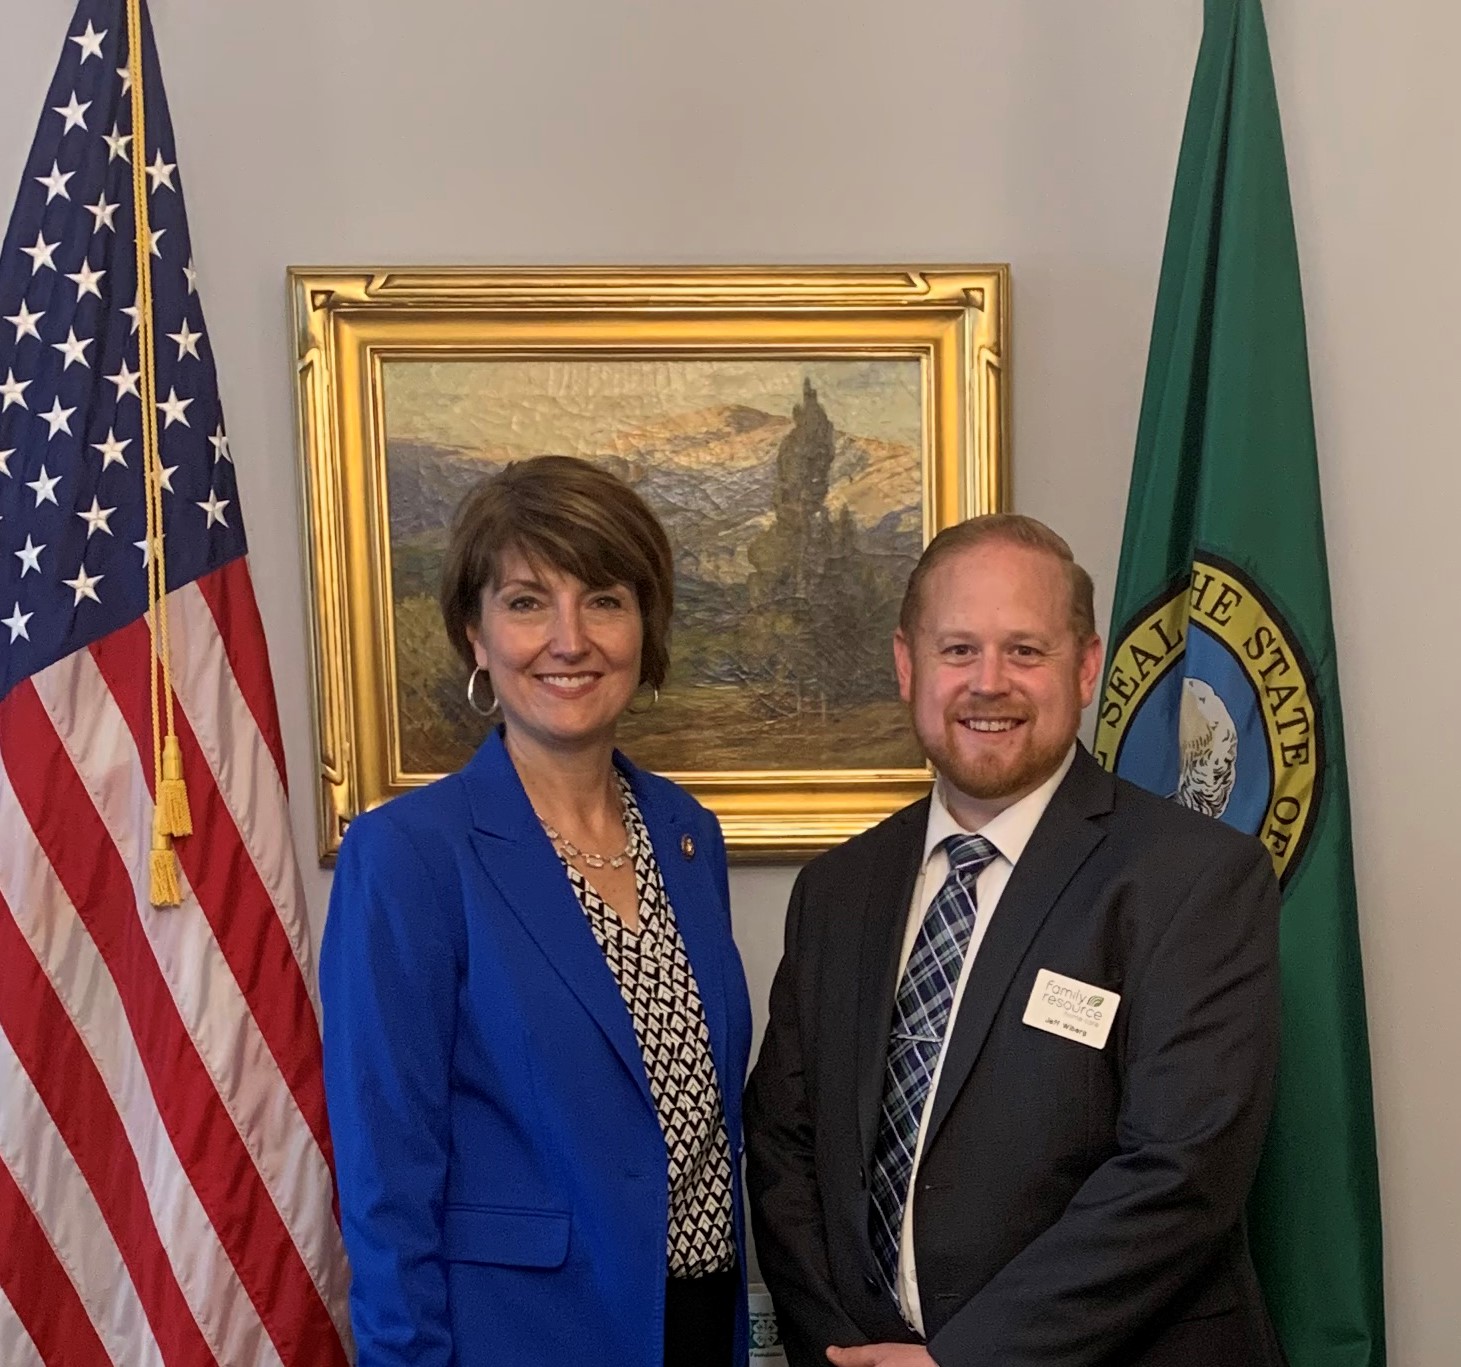 CEO Jeff Wiberg with Cathy McMorris Rogers home care